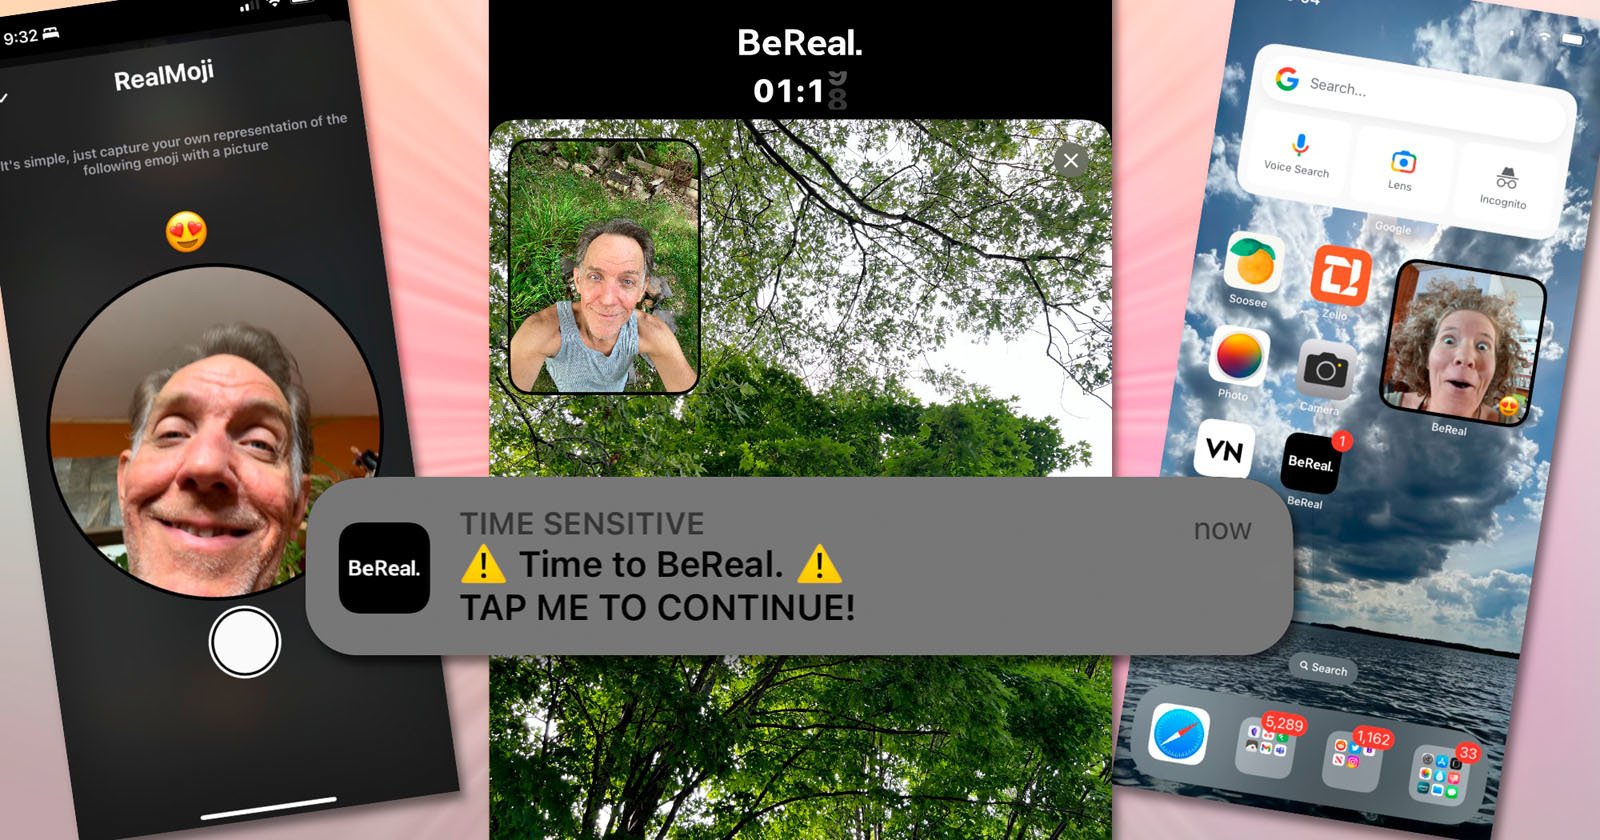  how use bereal guide hit photo sharing 